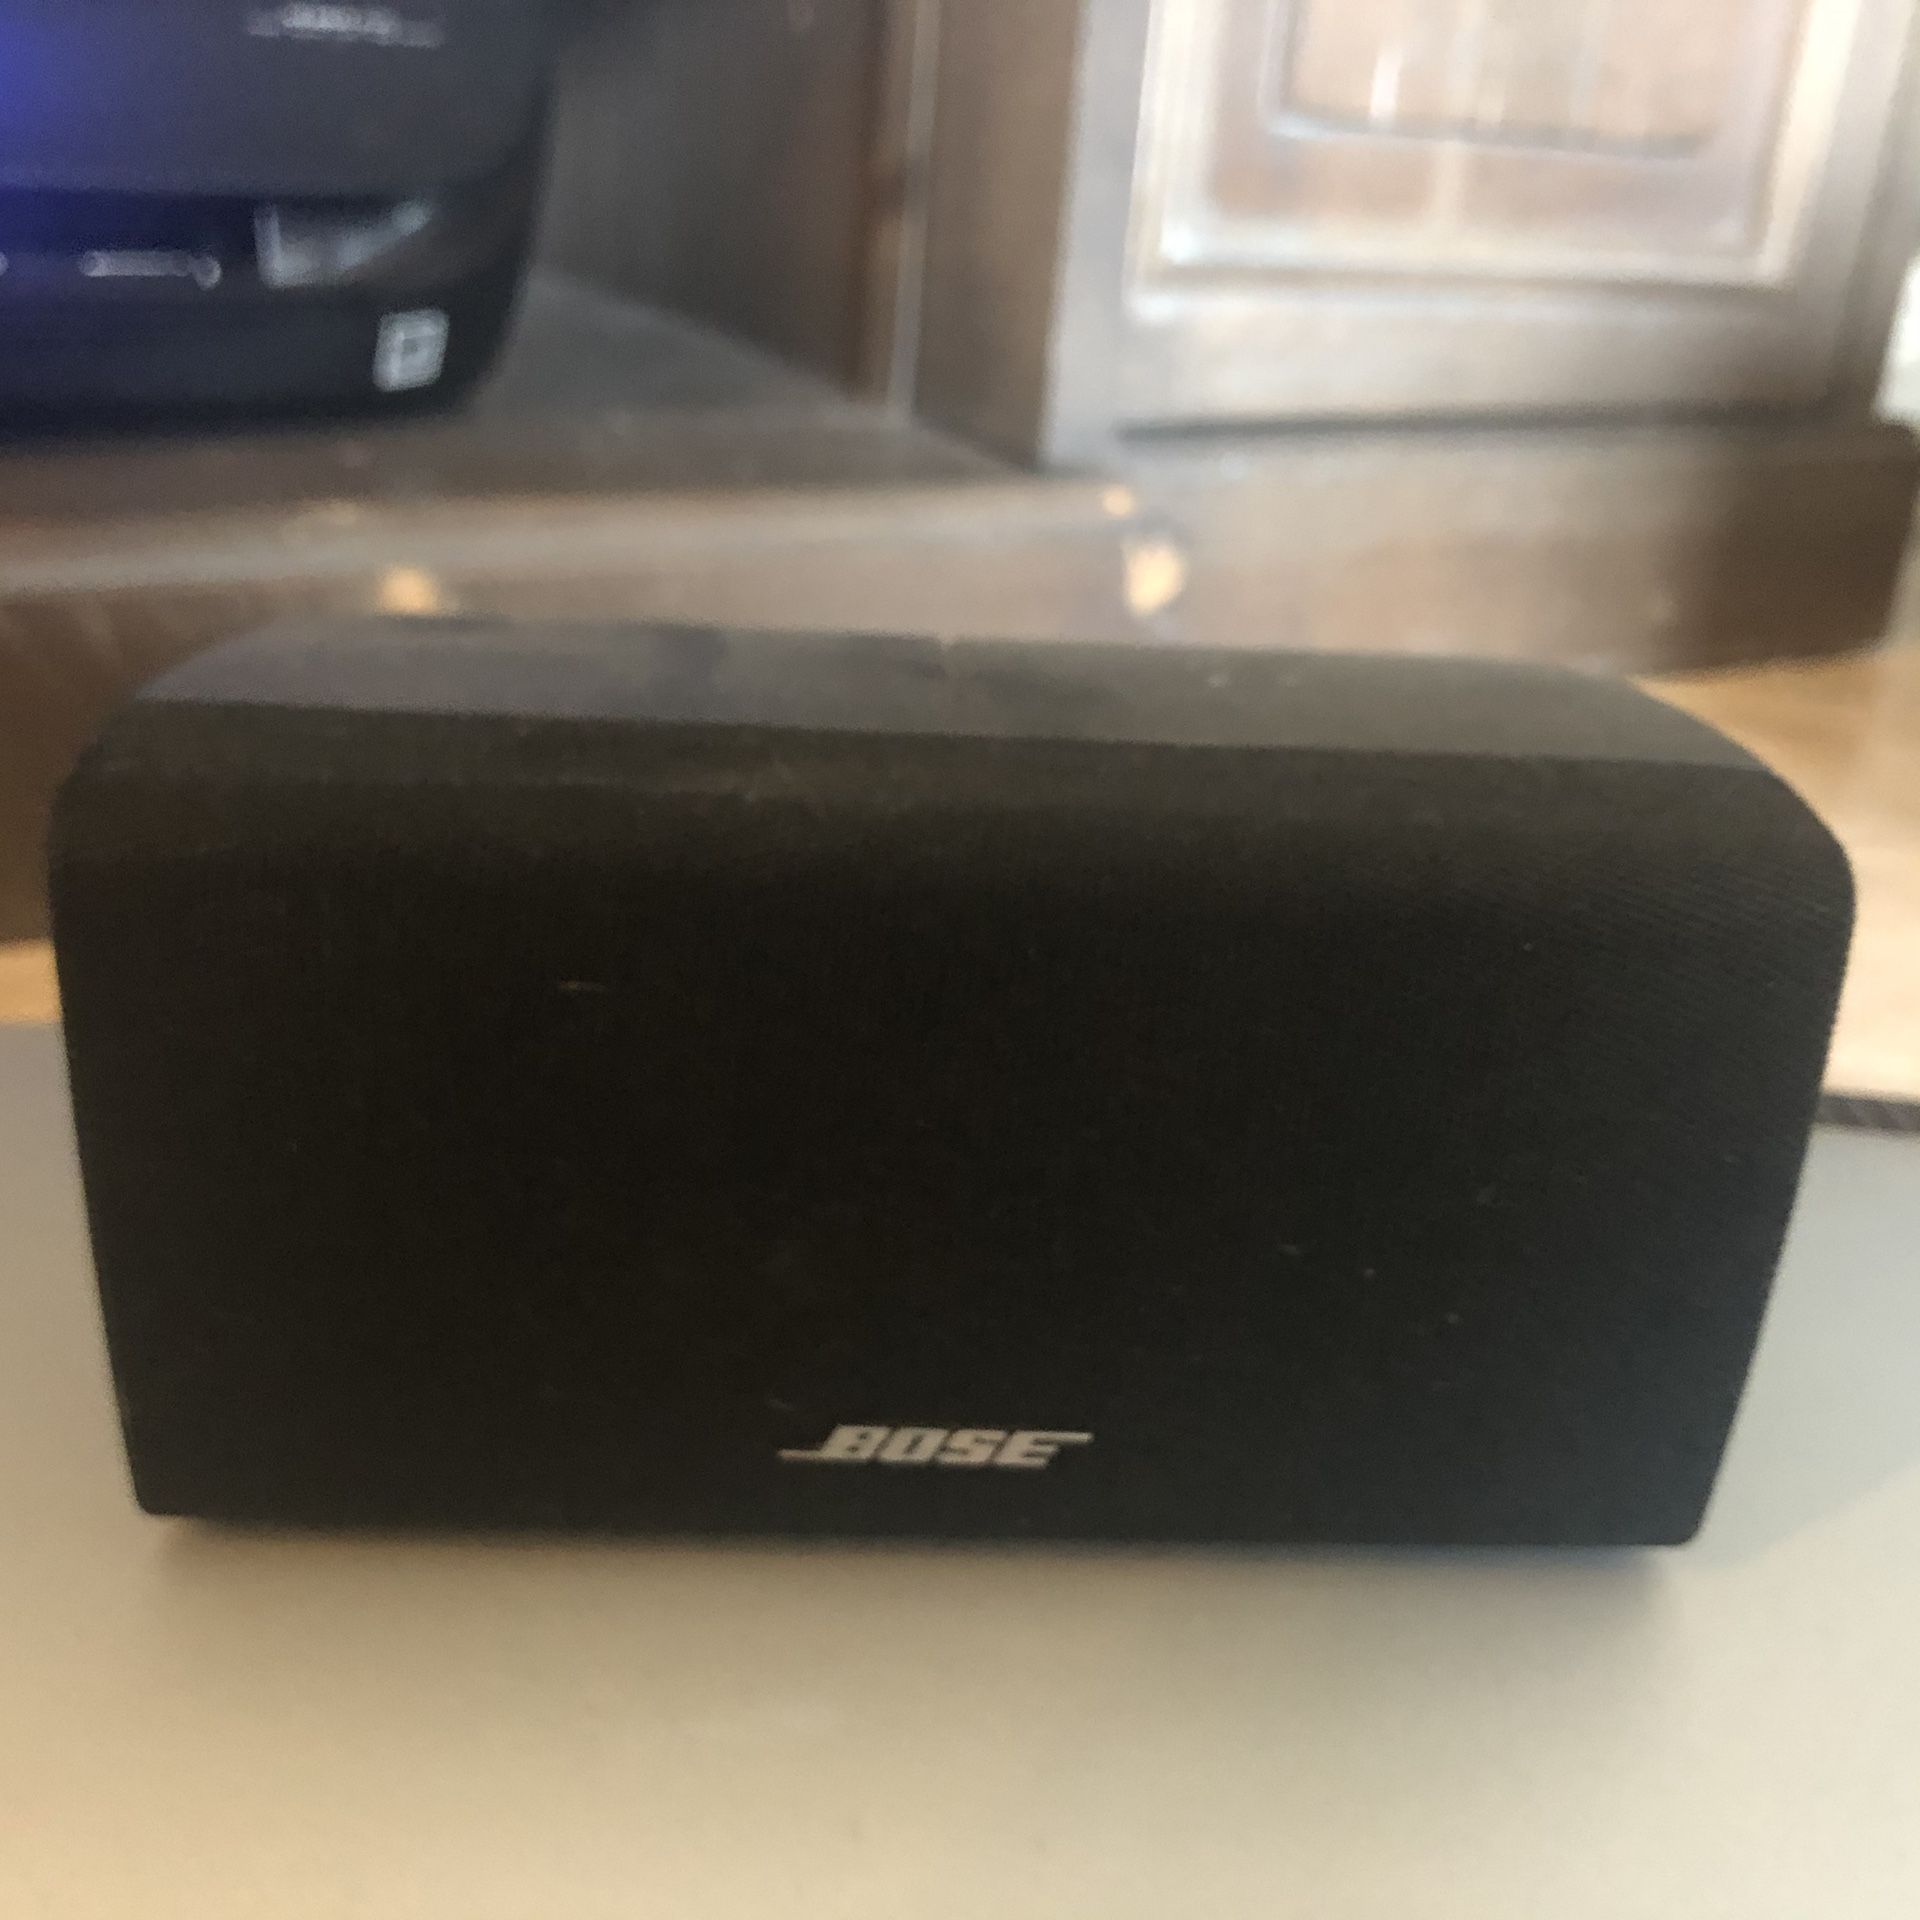 Bose sound system - surround speakers - dvd Bose